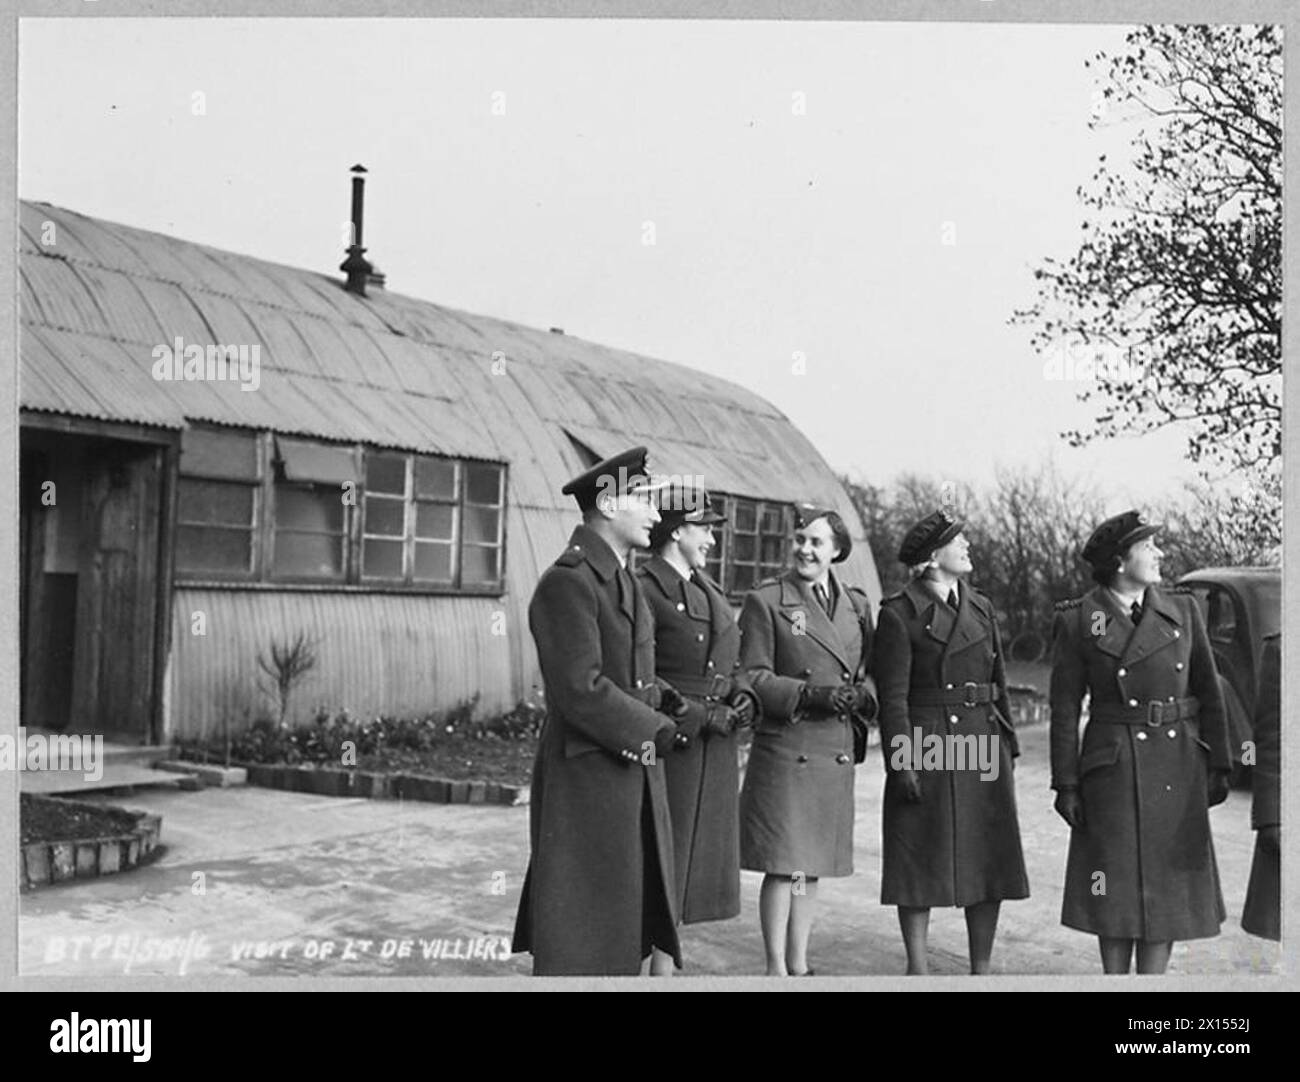 GENERAL SMUTS' DAUGHTER VISITS AN R.A.F. STATION IN ENGLAND - Picture taken during the visit of General Smuts' saughter Lieutenant K. de Villiers, to an R.A.F. station shows - outside the officers' mess at an R.A.F. station in England left to right - are - Group Captain R.D.Stubbs, DFC., [Commanding Officer]; Flight Officer J. Alldie, W.A.A.F. Officer in charge of WAAF Sect Lieutenant K. de Villiers; Flight Officer H.F. Manning, and Squadron Officer H.E. Collett Royal Air Force Stock Photo